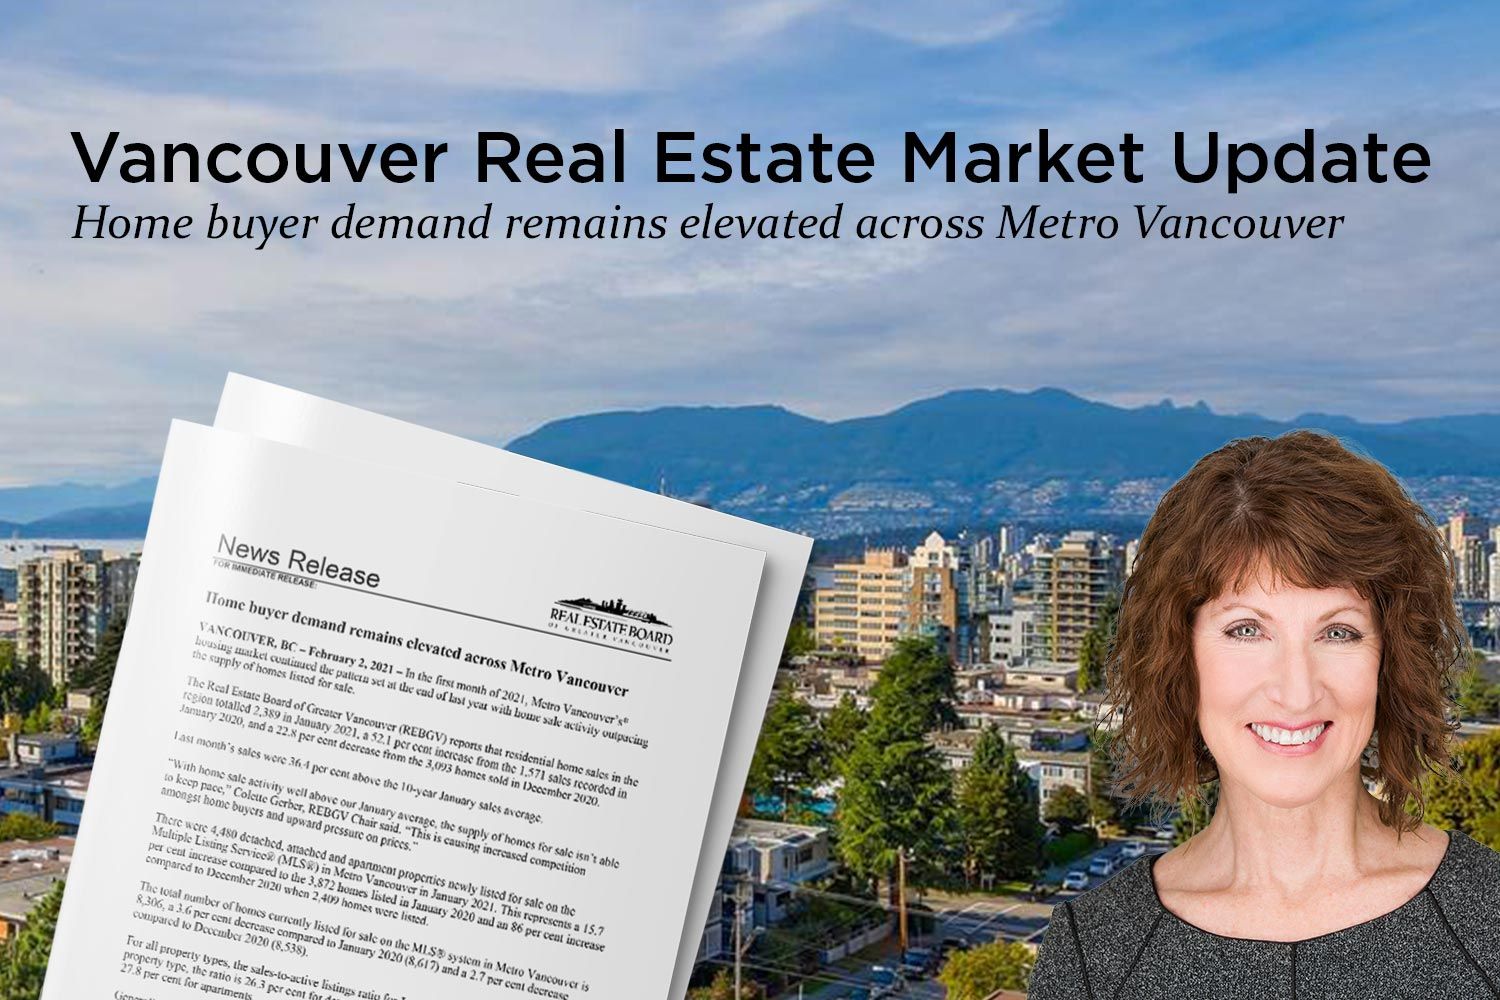 Home buyer demand remains elevated across Metro Vancouver